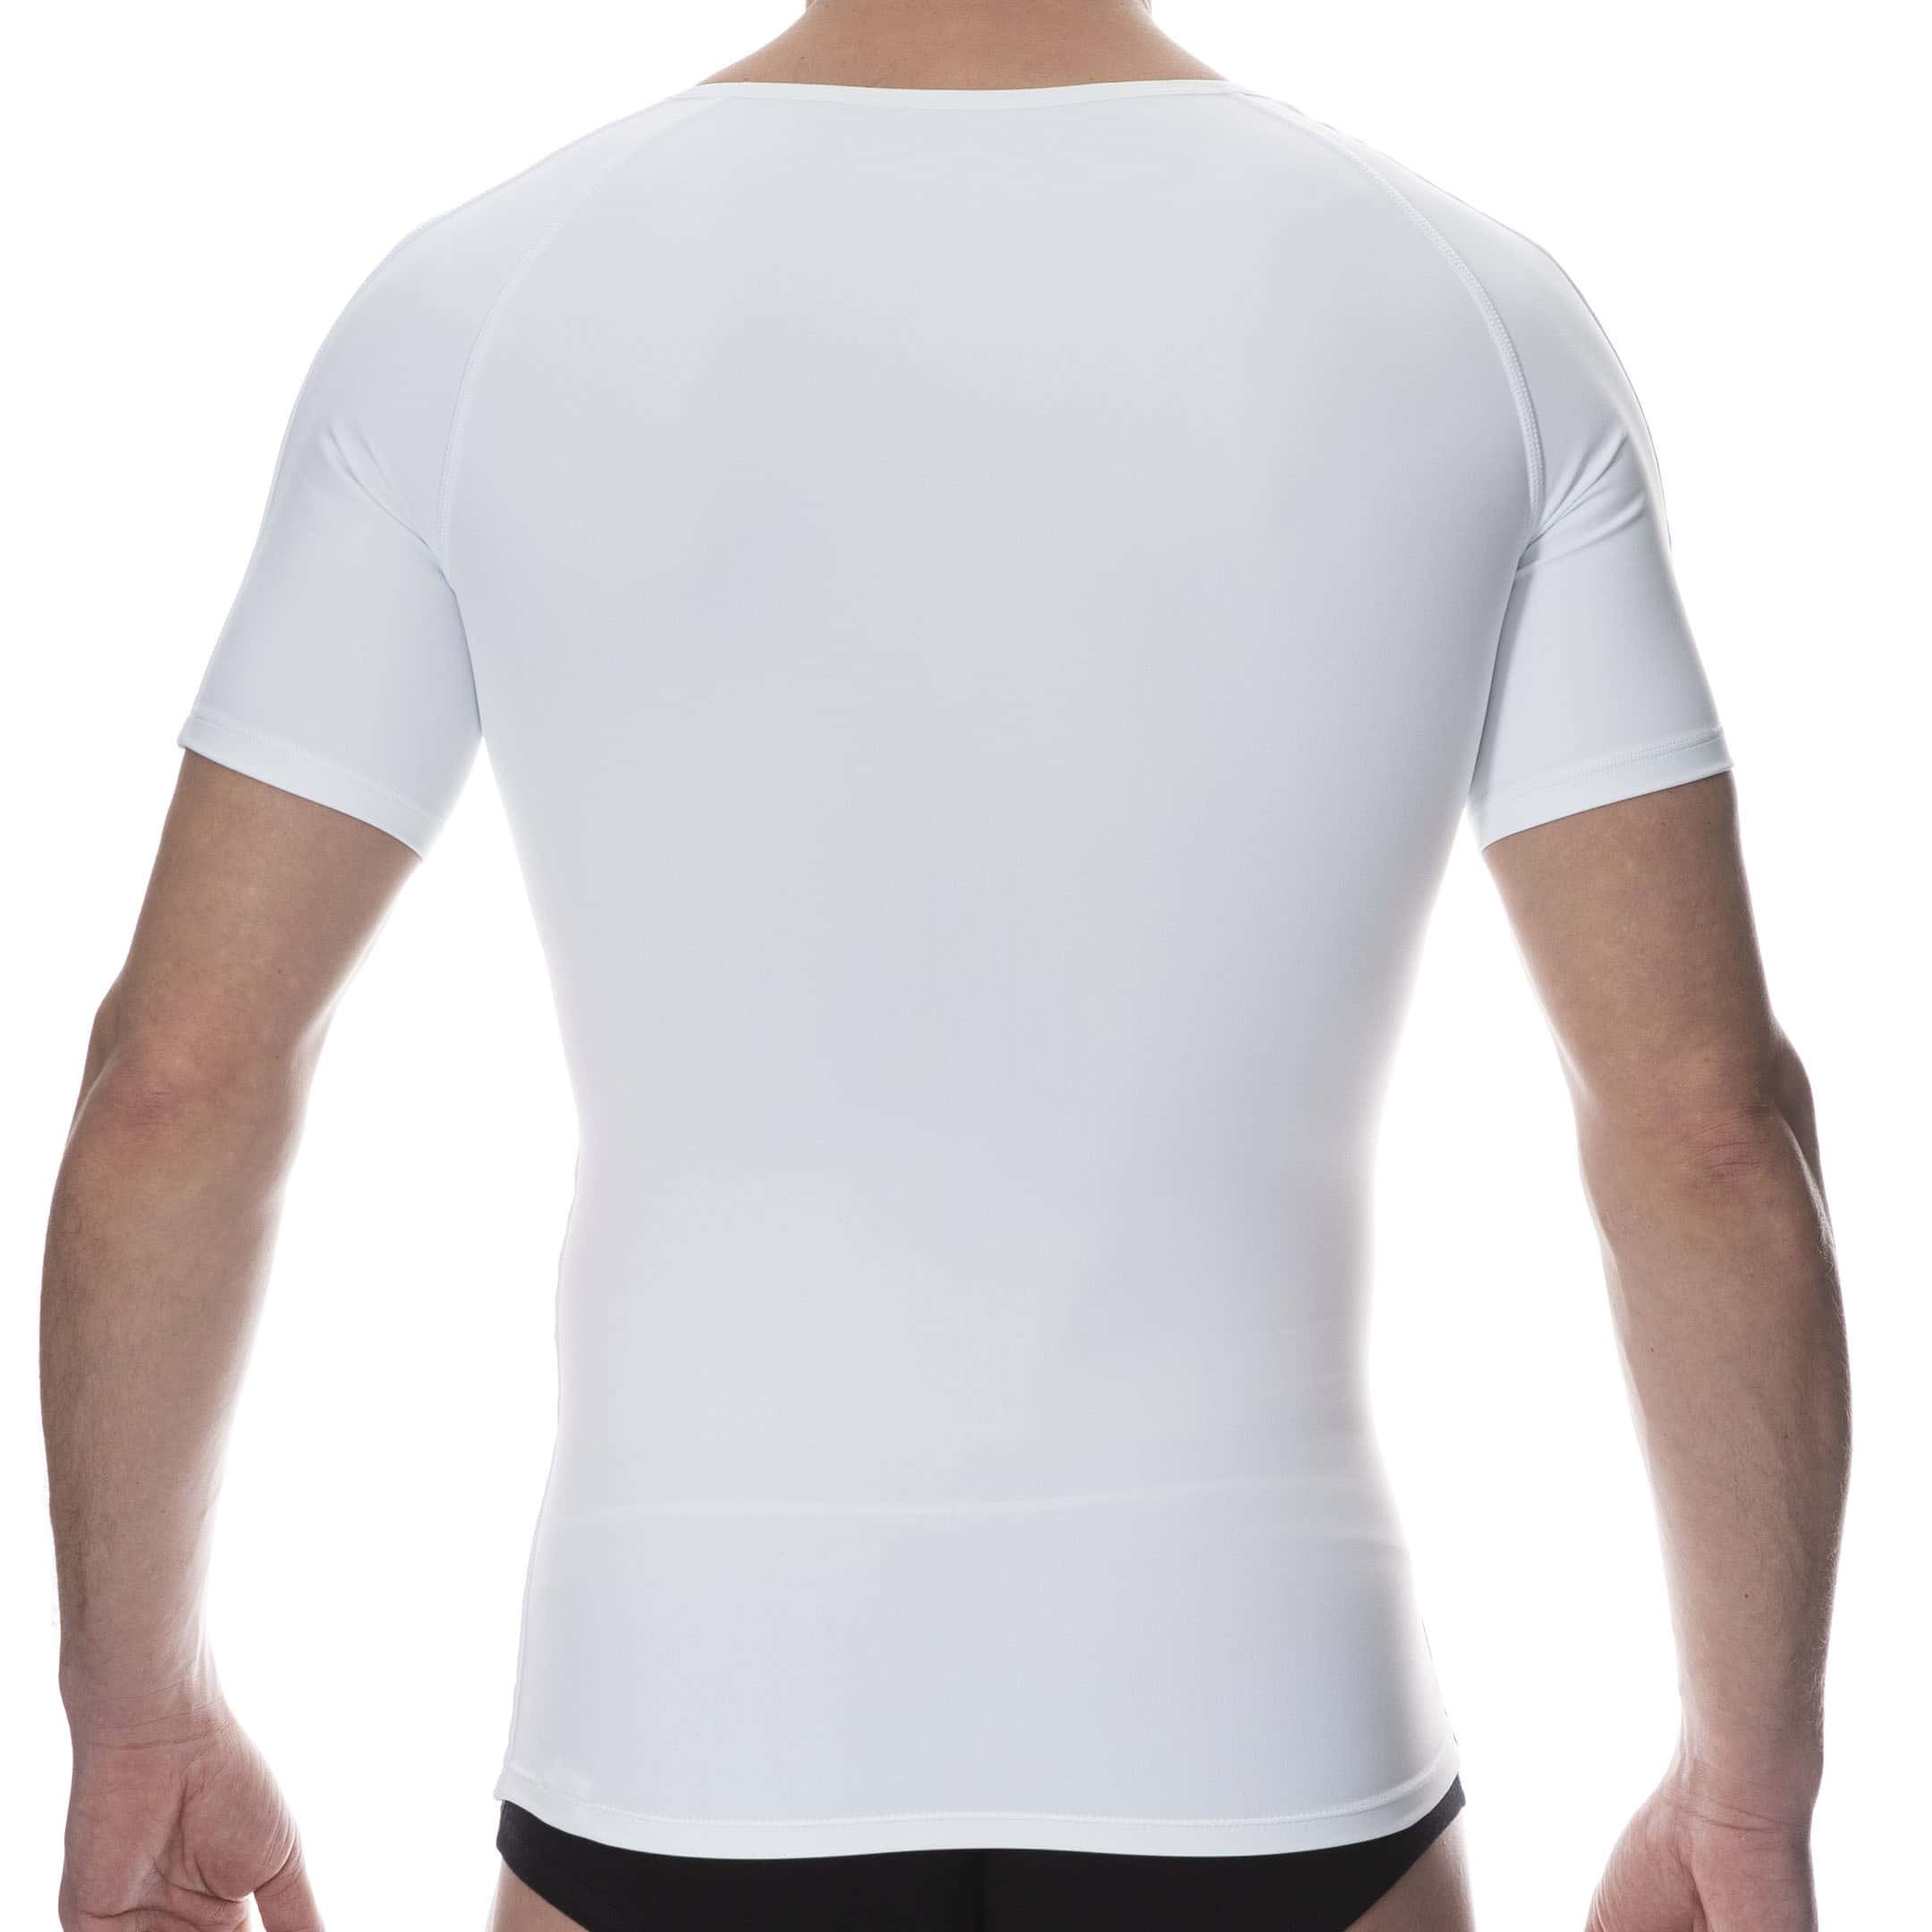 The perfect sleeveless compression shirt that won't disappoint